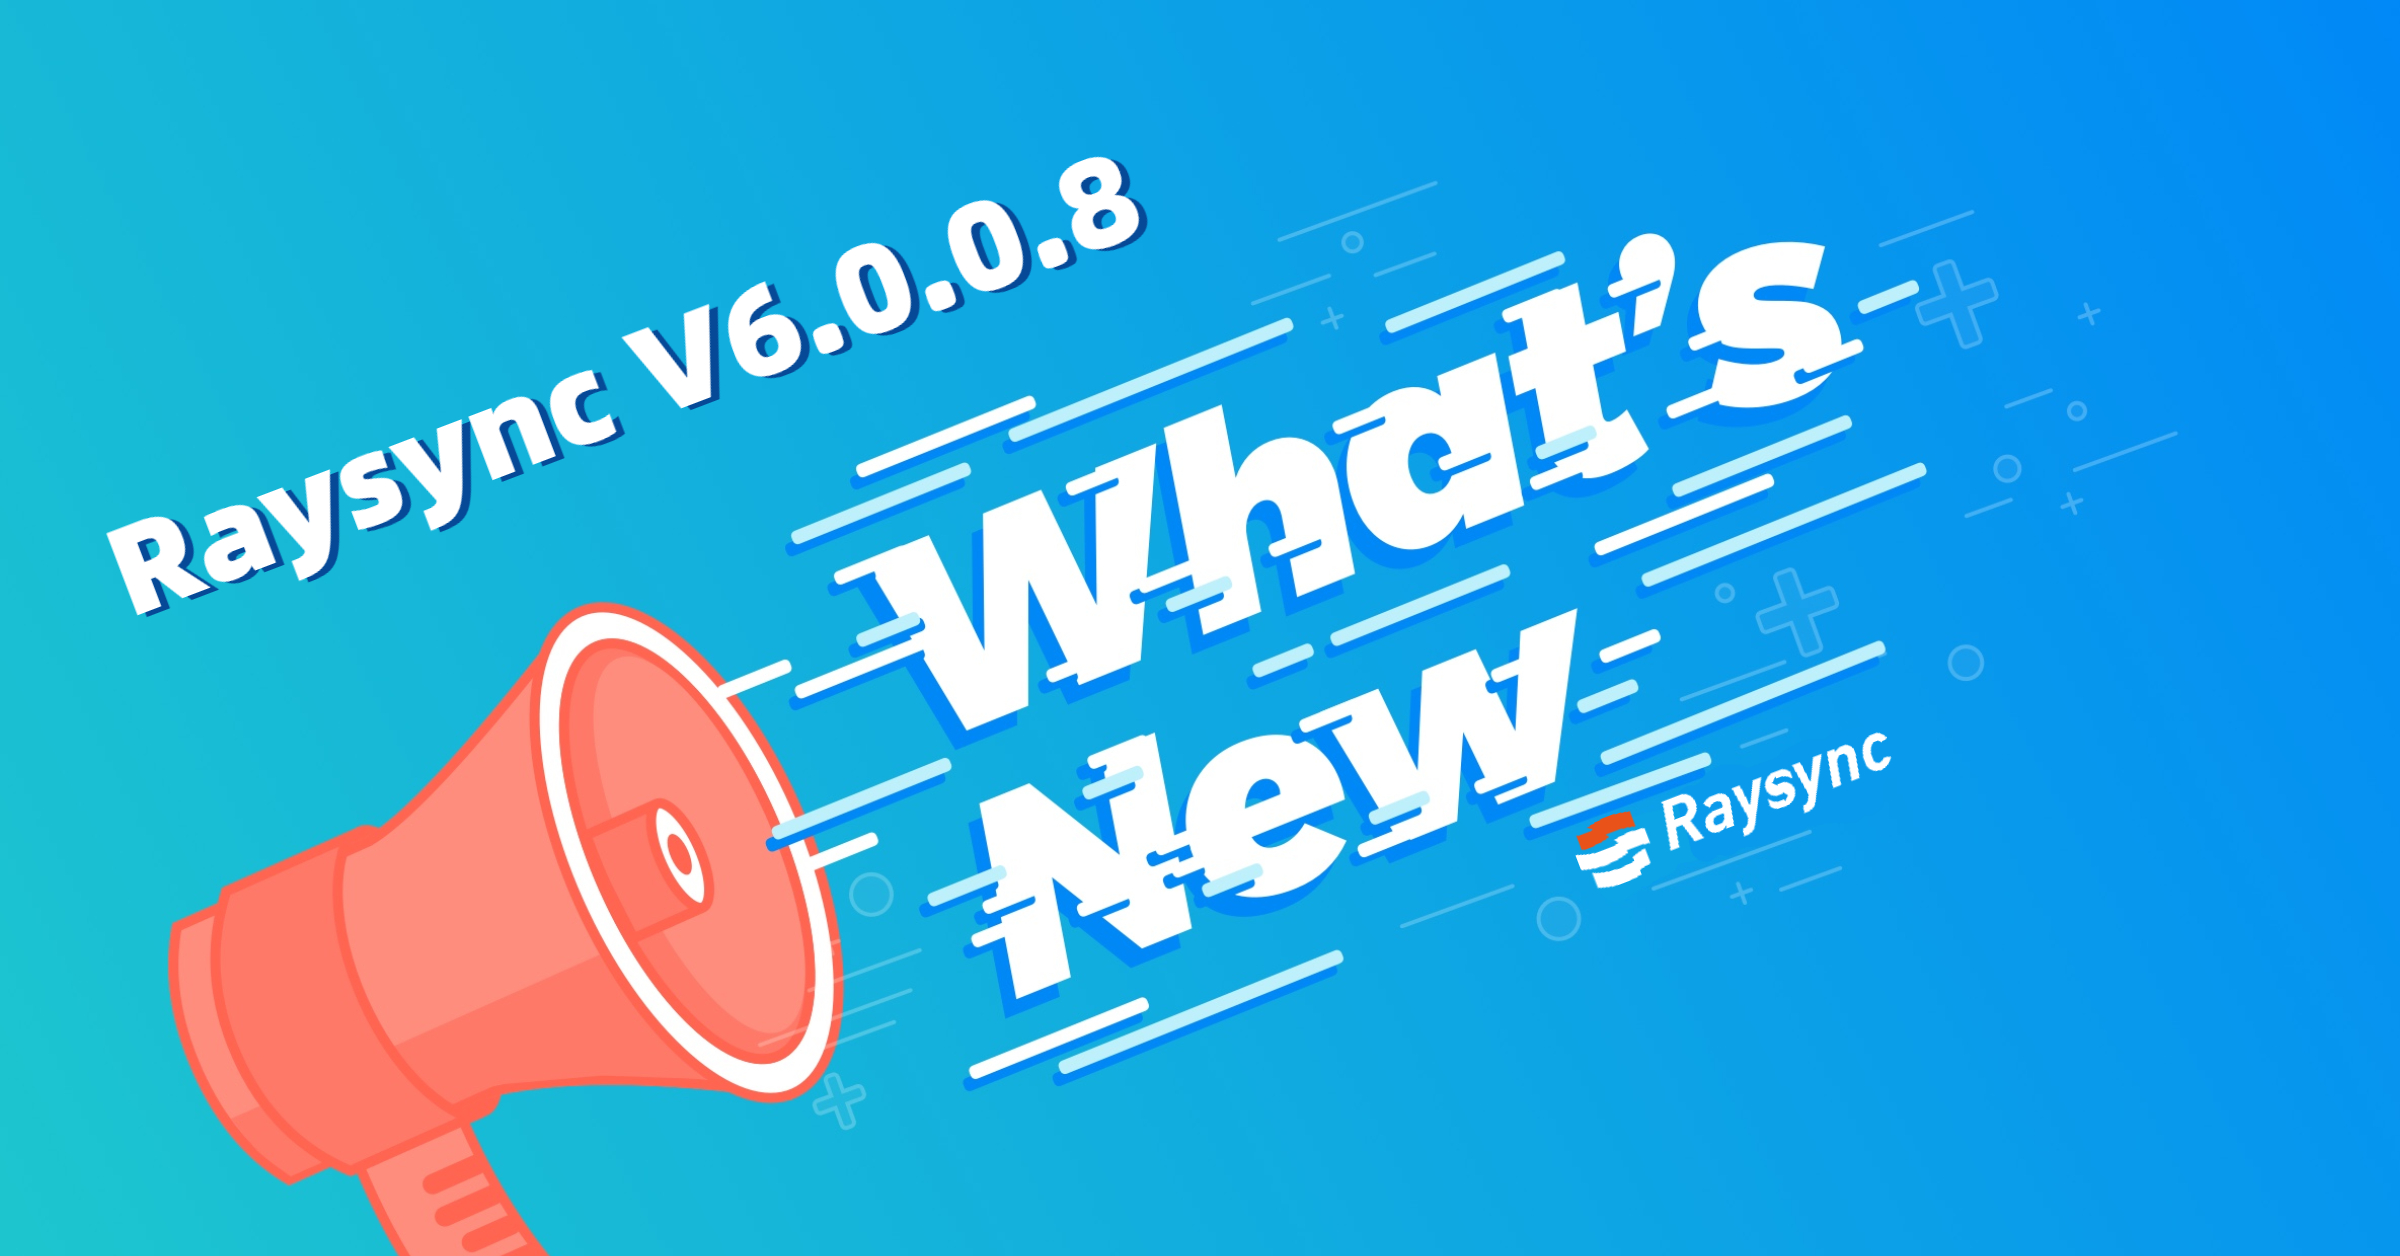 What’s New in Raysync 6.0.0.8 Updates?